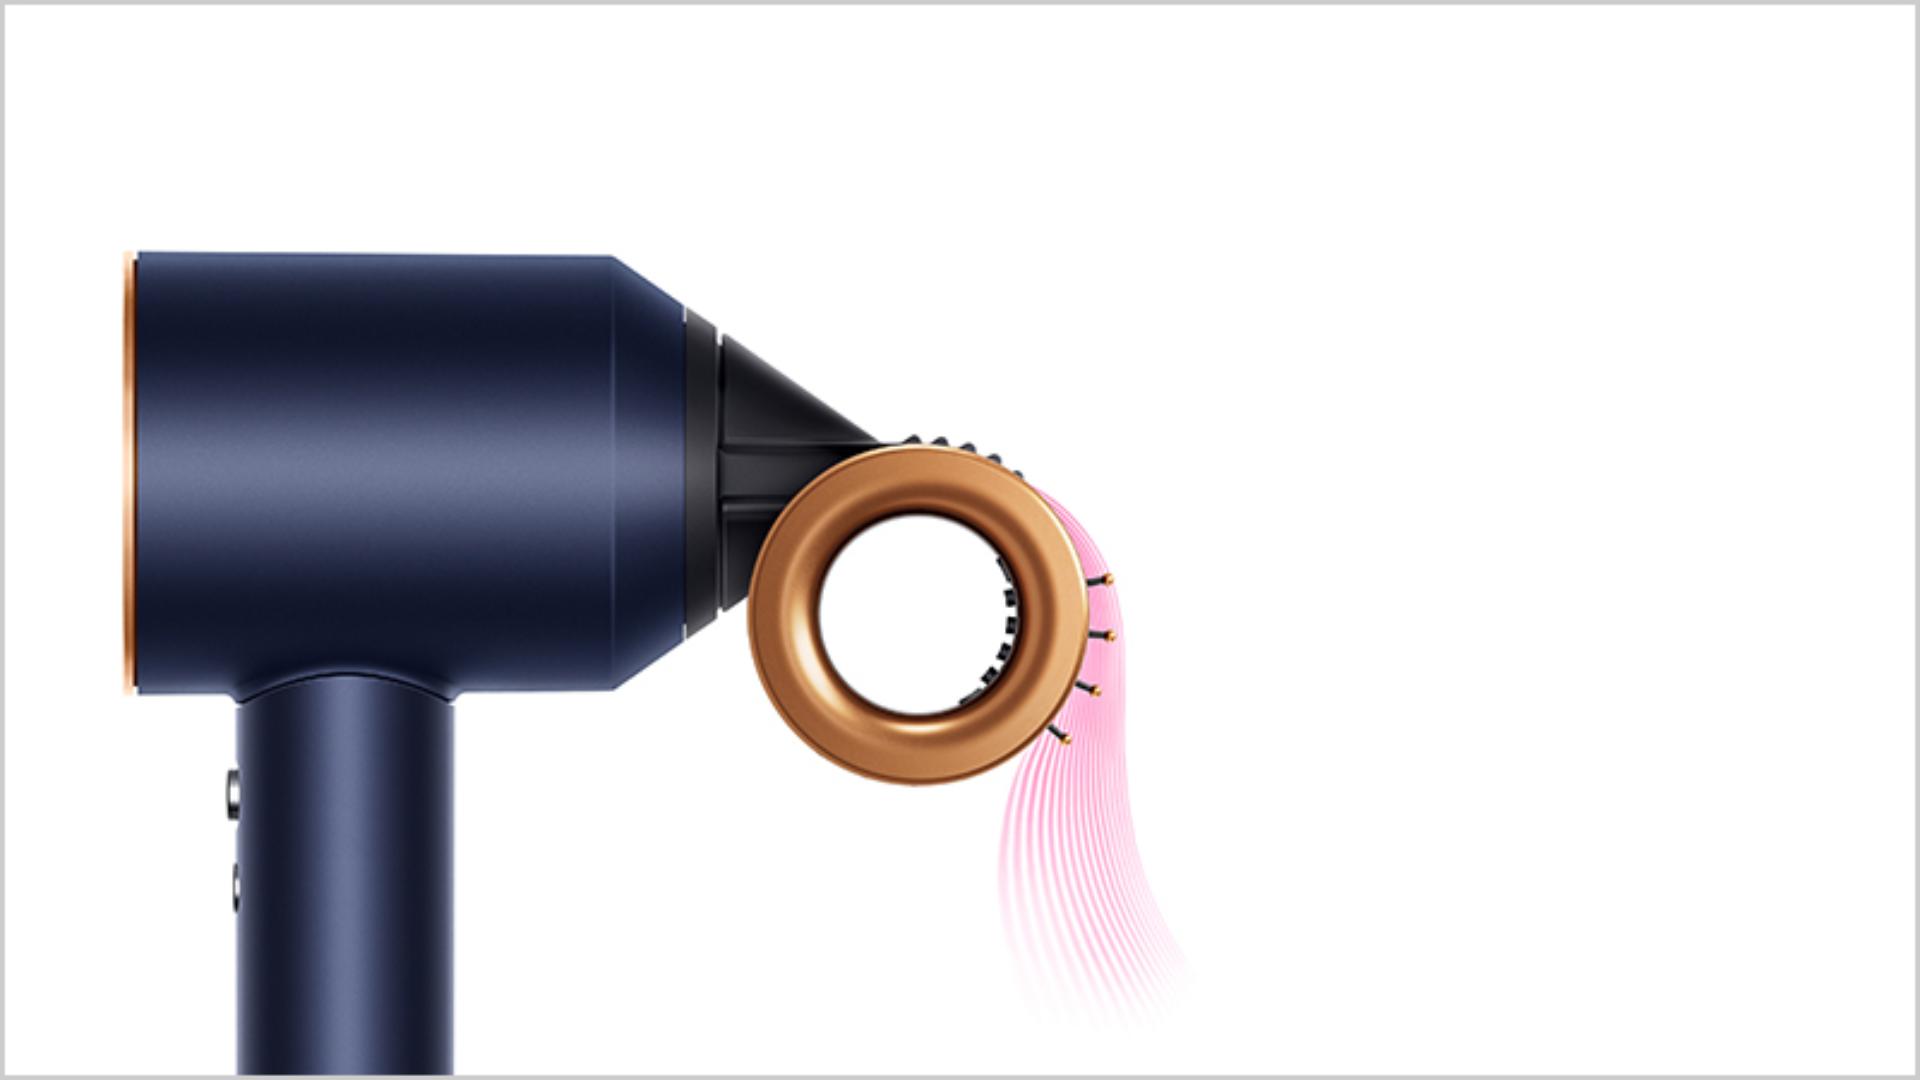 Side view of the Dyson Supersonic with Flyaway smoother attachment.